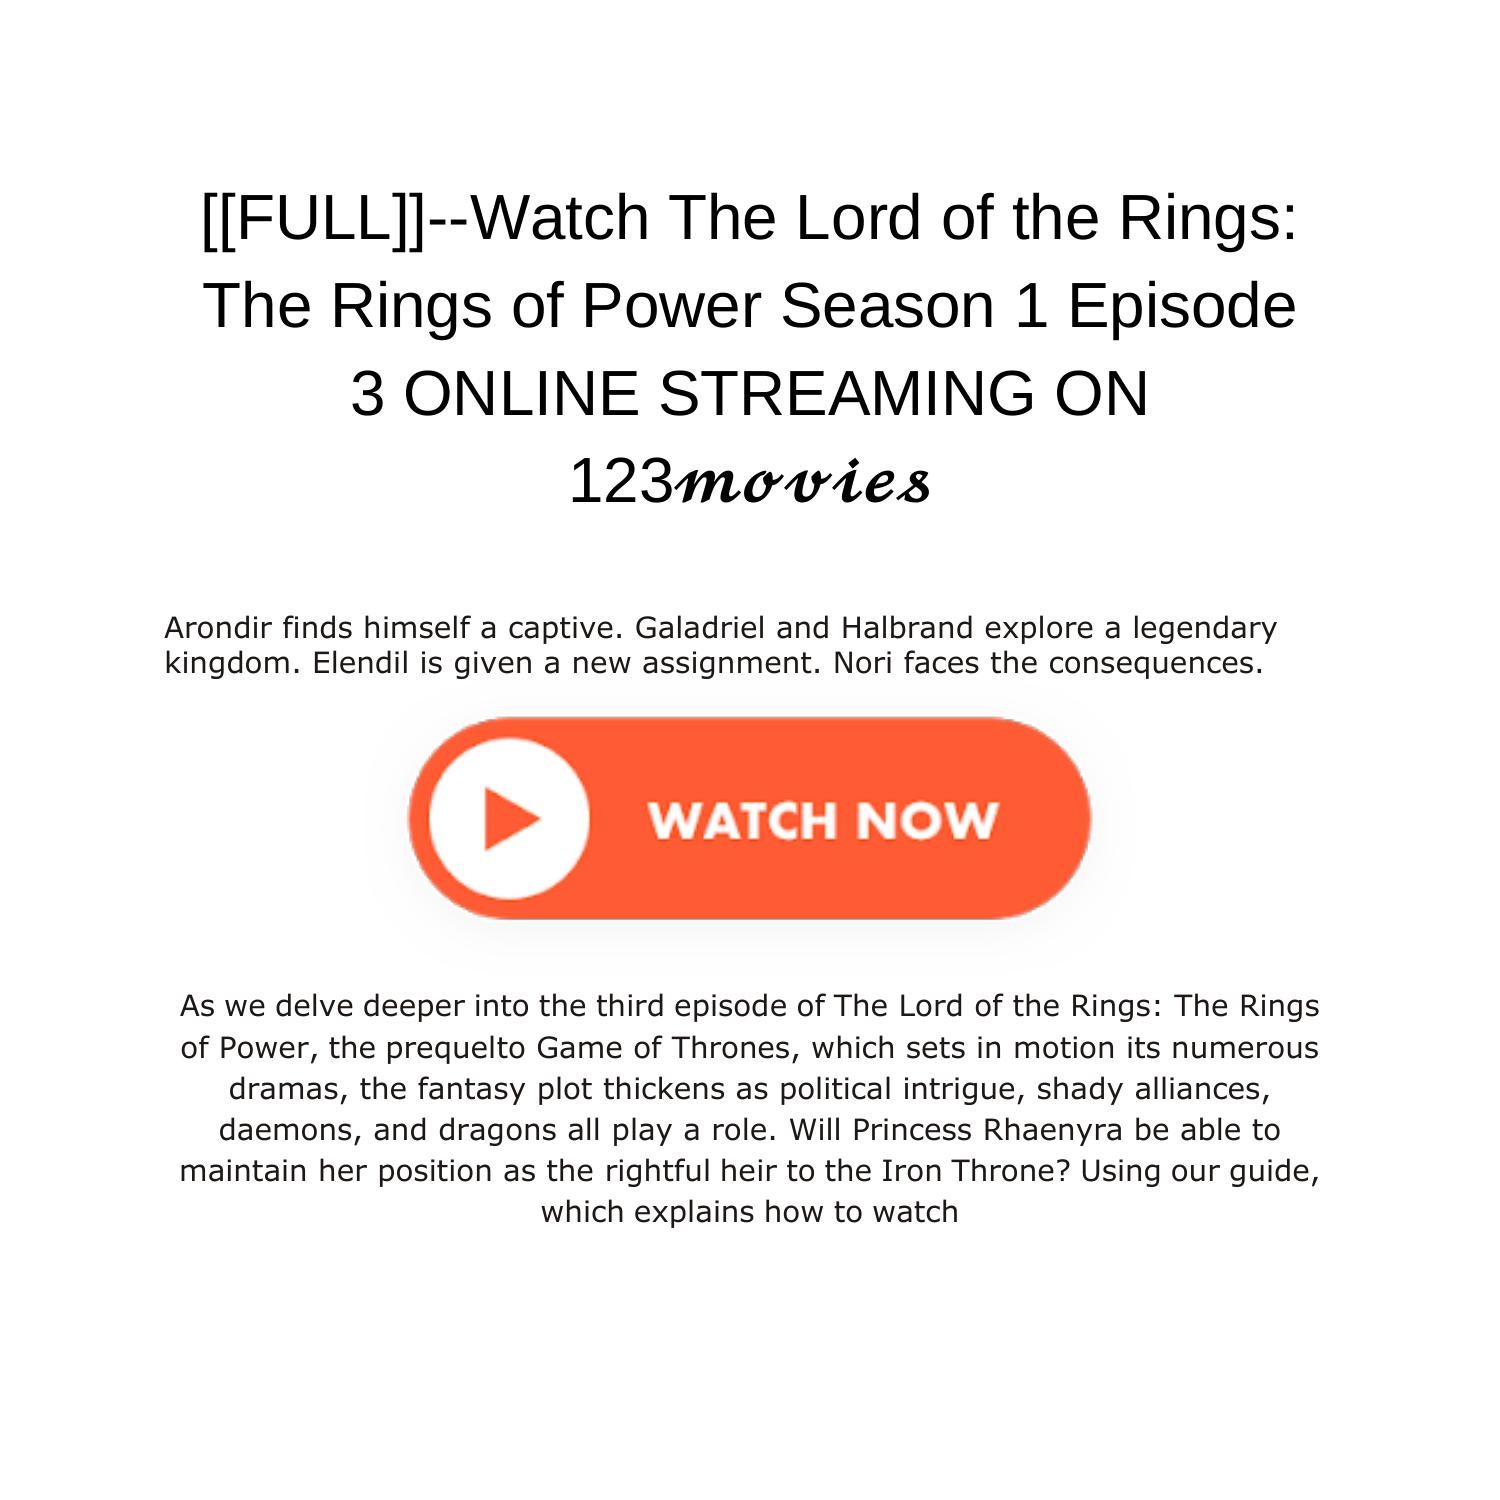 charme kloon Ezel Watch The Lord of the Rings The Rings of Power Season 1 Episode 3.pdf |  DocDroid